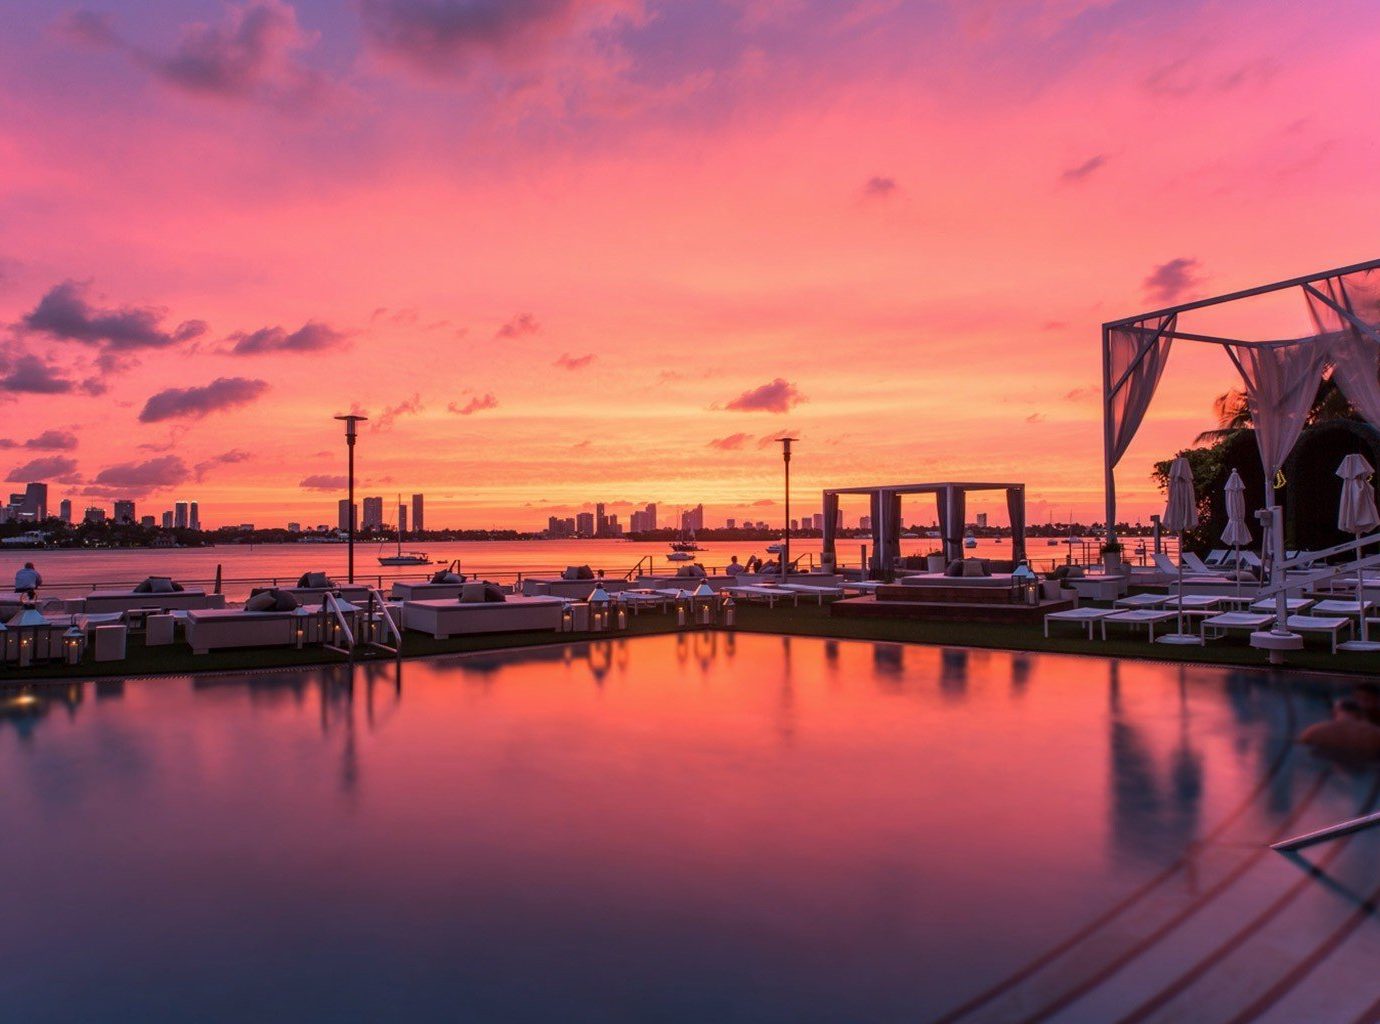 Jetsetter Guides sky water outdoor Boat scene reflection Sunset sunrise dawn afterglow dusk evening horizon morning River cityscape docked dock Sea skyline bridge waterway Harbor marina pier long clouds several